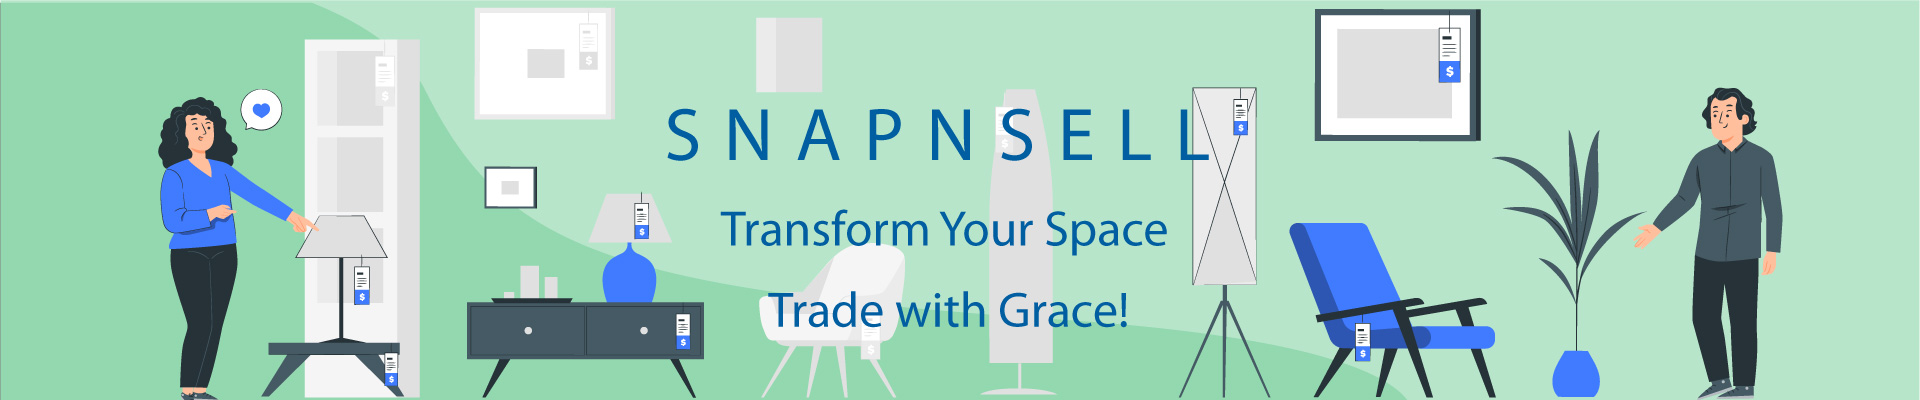 Transform Your Space, Trade with Grace!